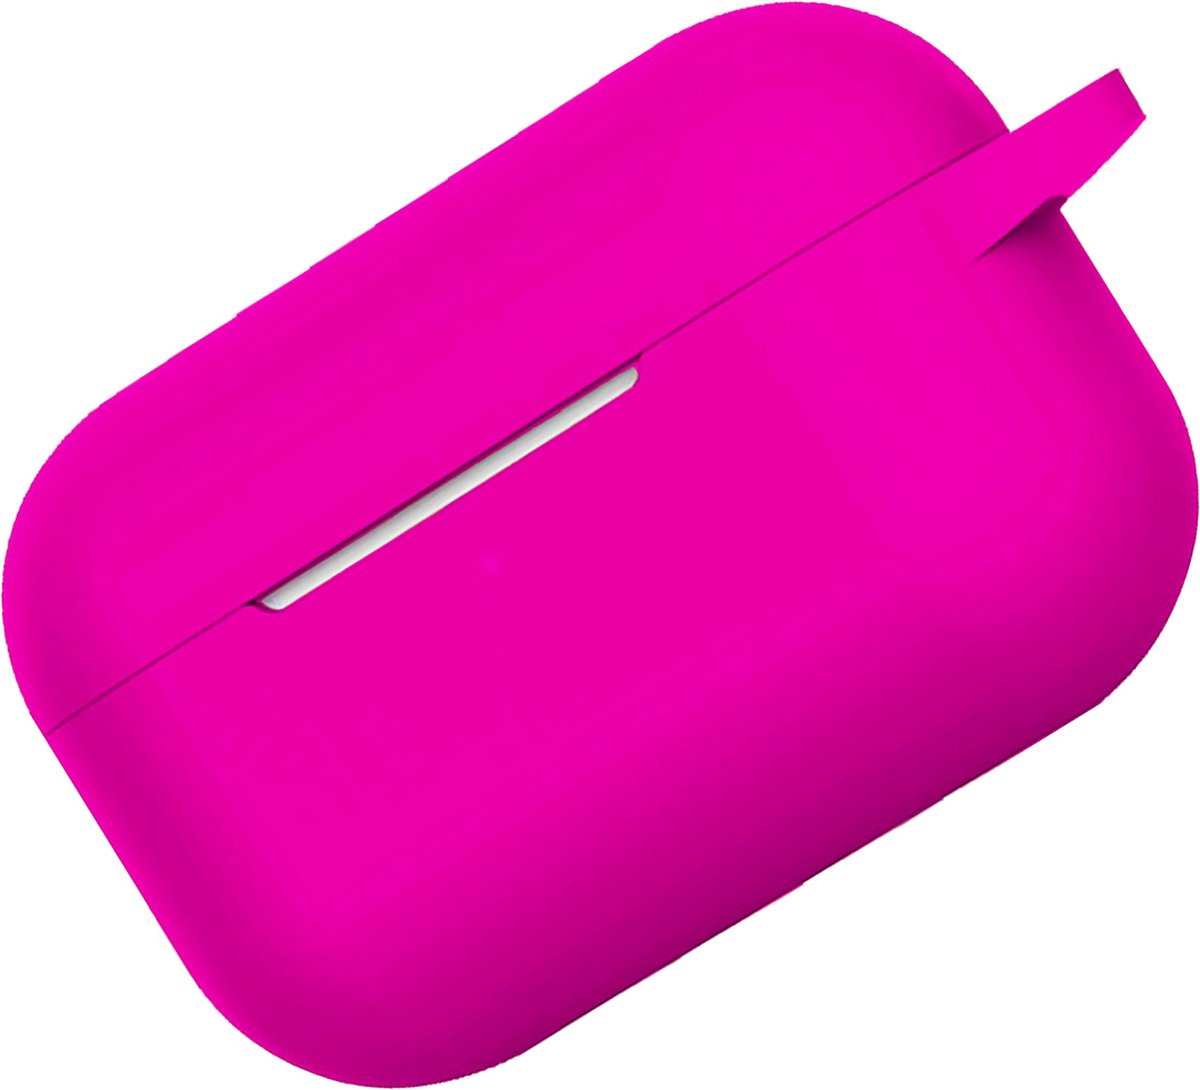 Hoes Geschikt voor Airpods Pro Hoesje Cover Silicone Case Hoes - Donkerroze